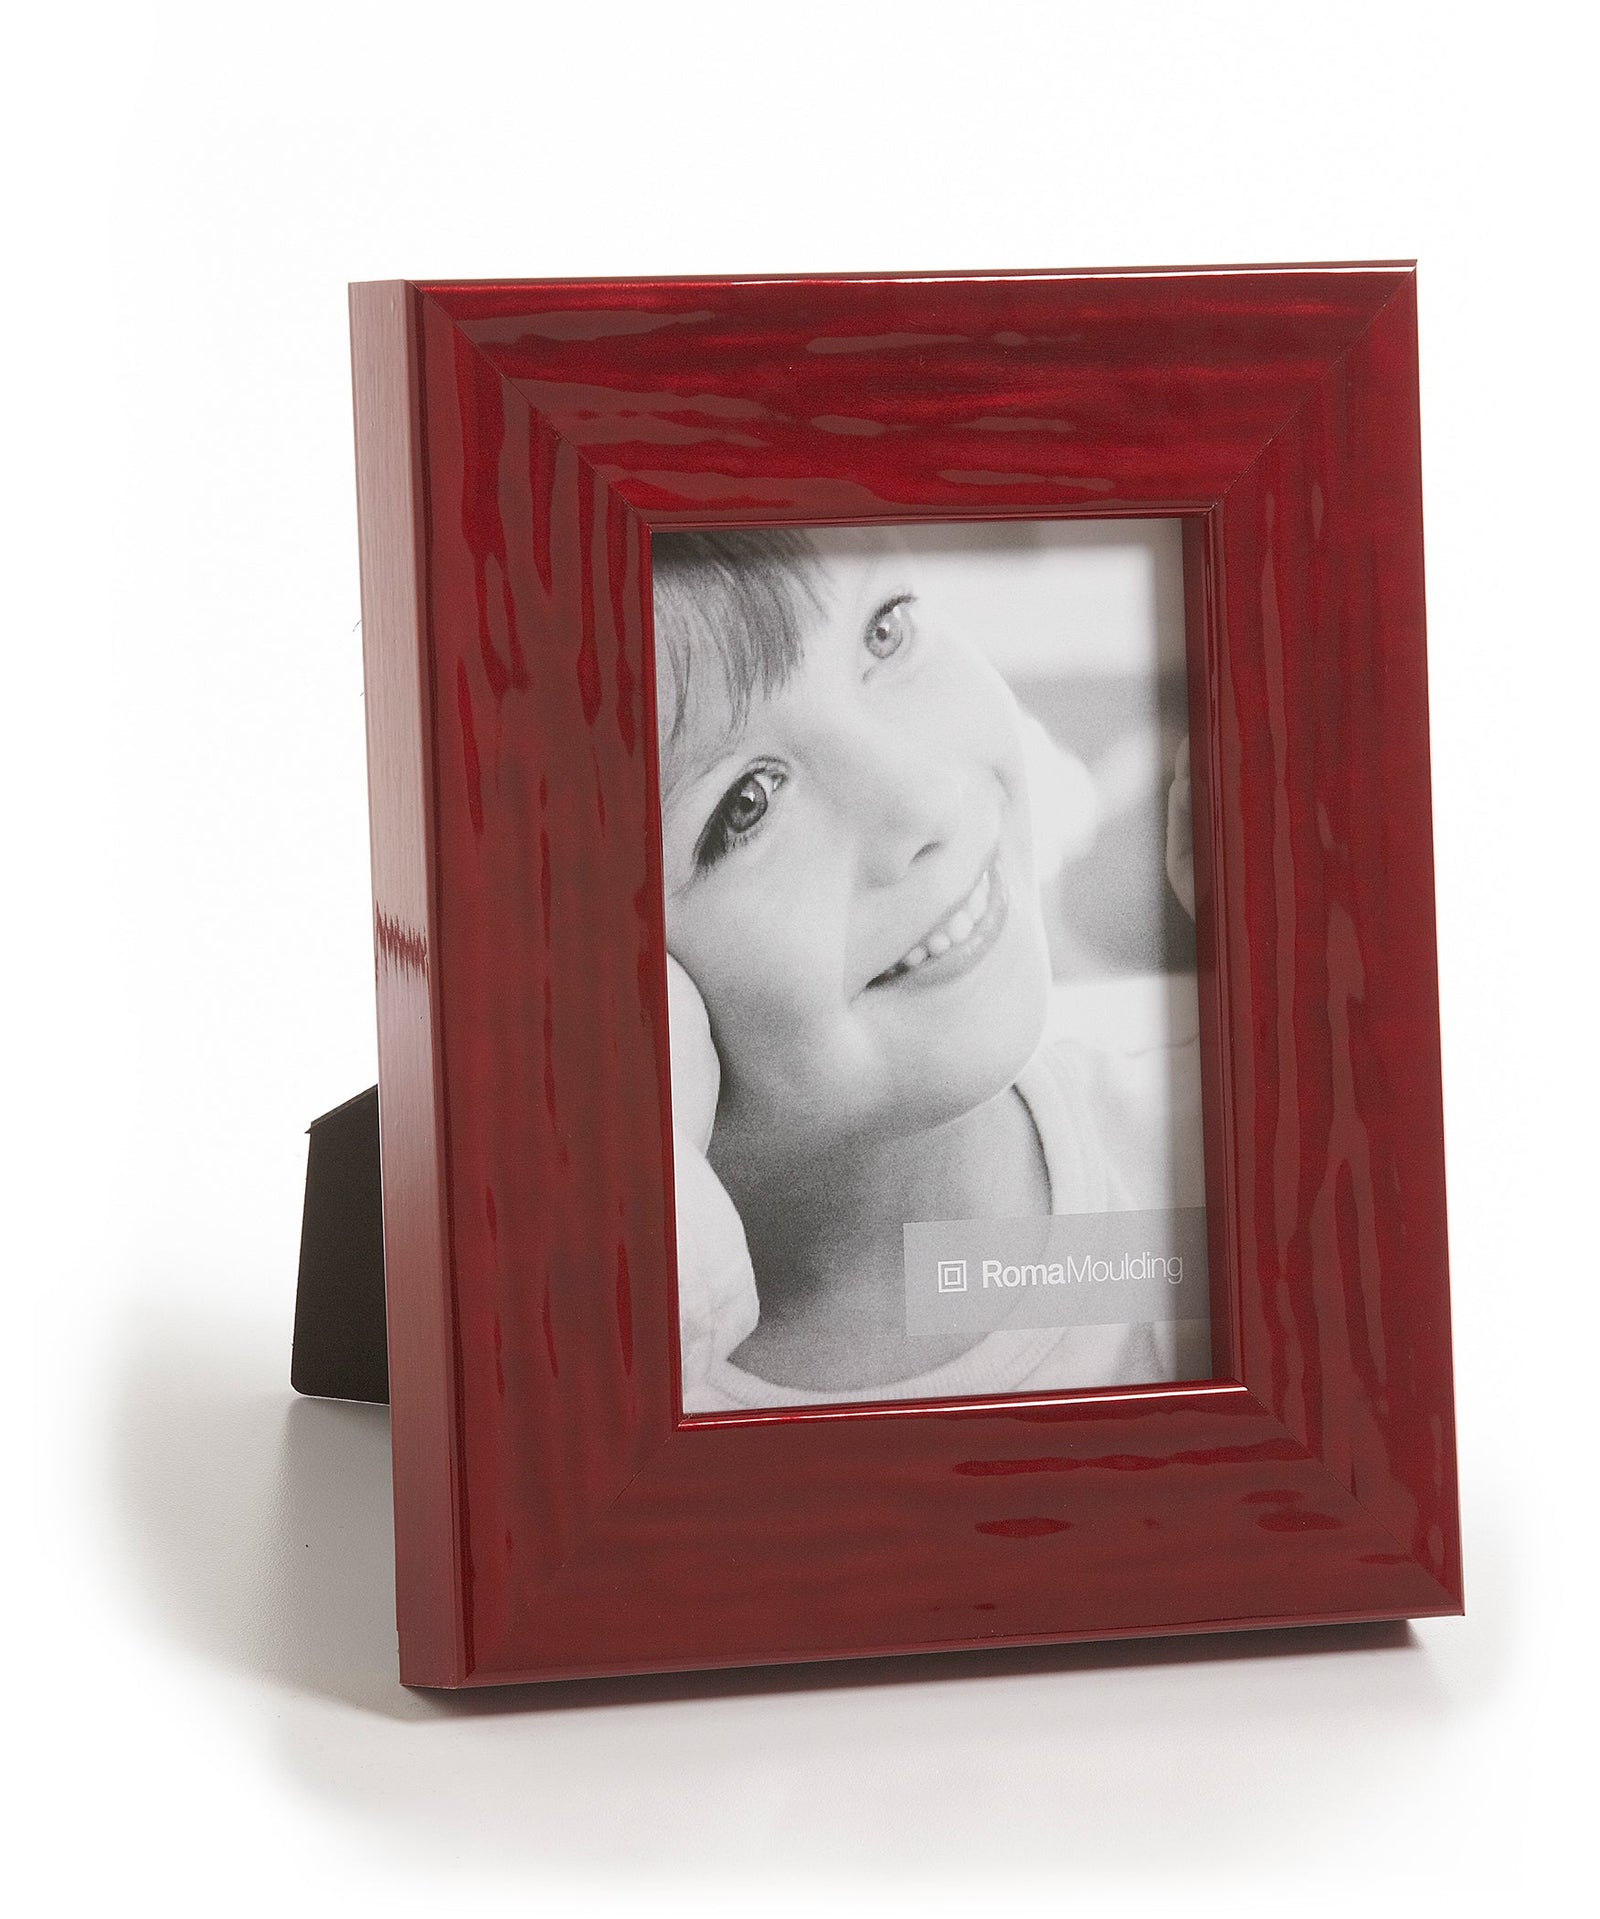  Redriver Picture Frame Set Wall Photo: 10 Variety Pack Rustic  Wood Photo Frames with Mat Lightweight Matted Gallery Picture Frames Bulk  for Wall or Tabletop Including 8x10 5x7 4x6 Light